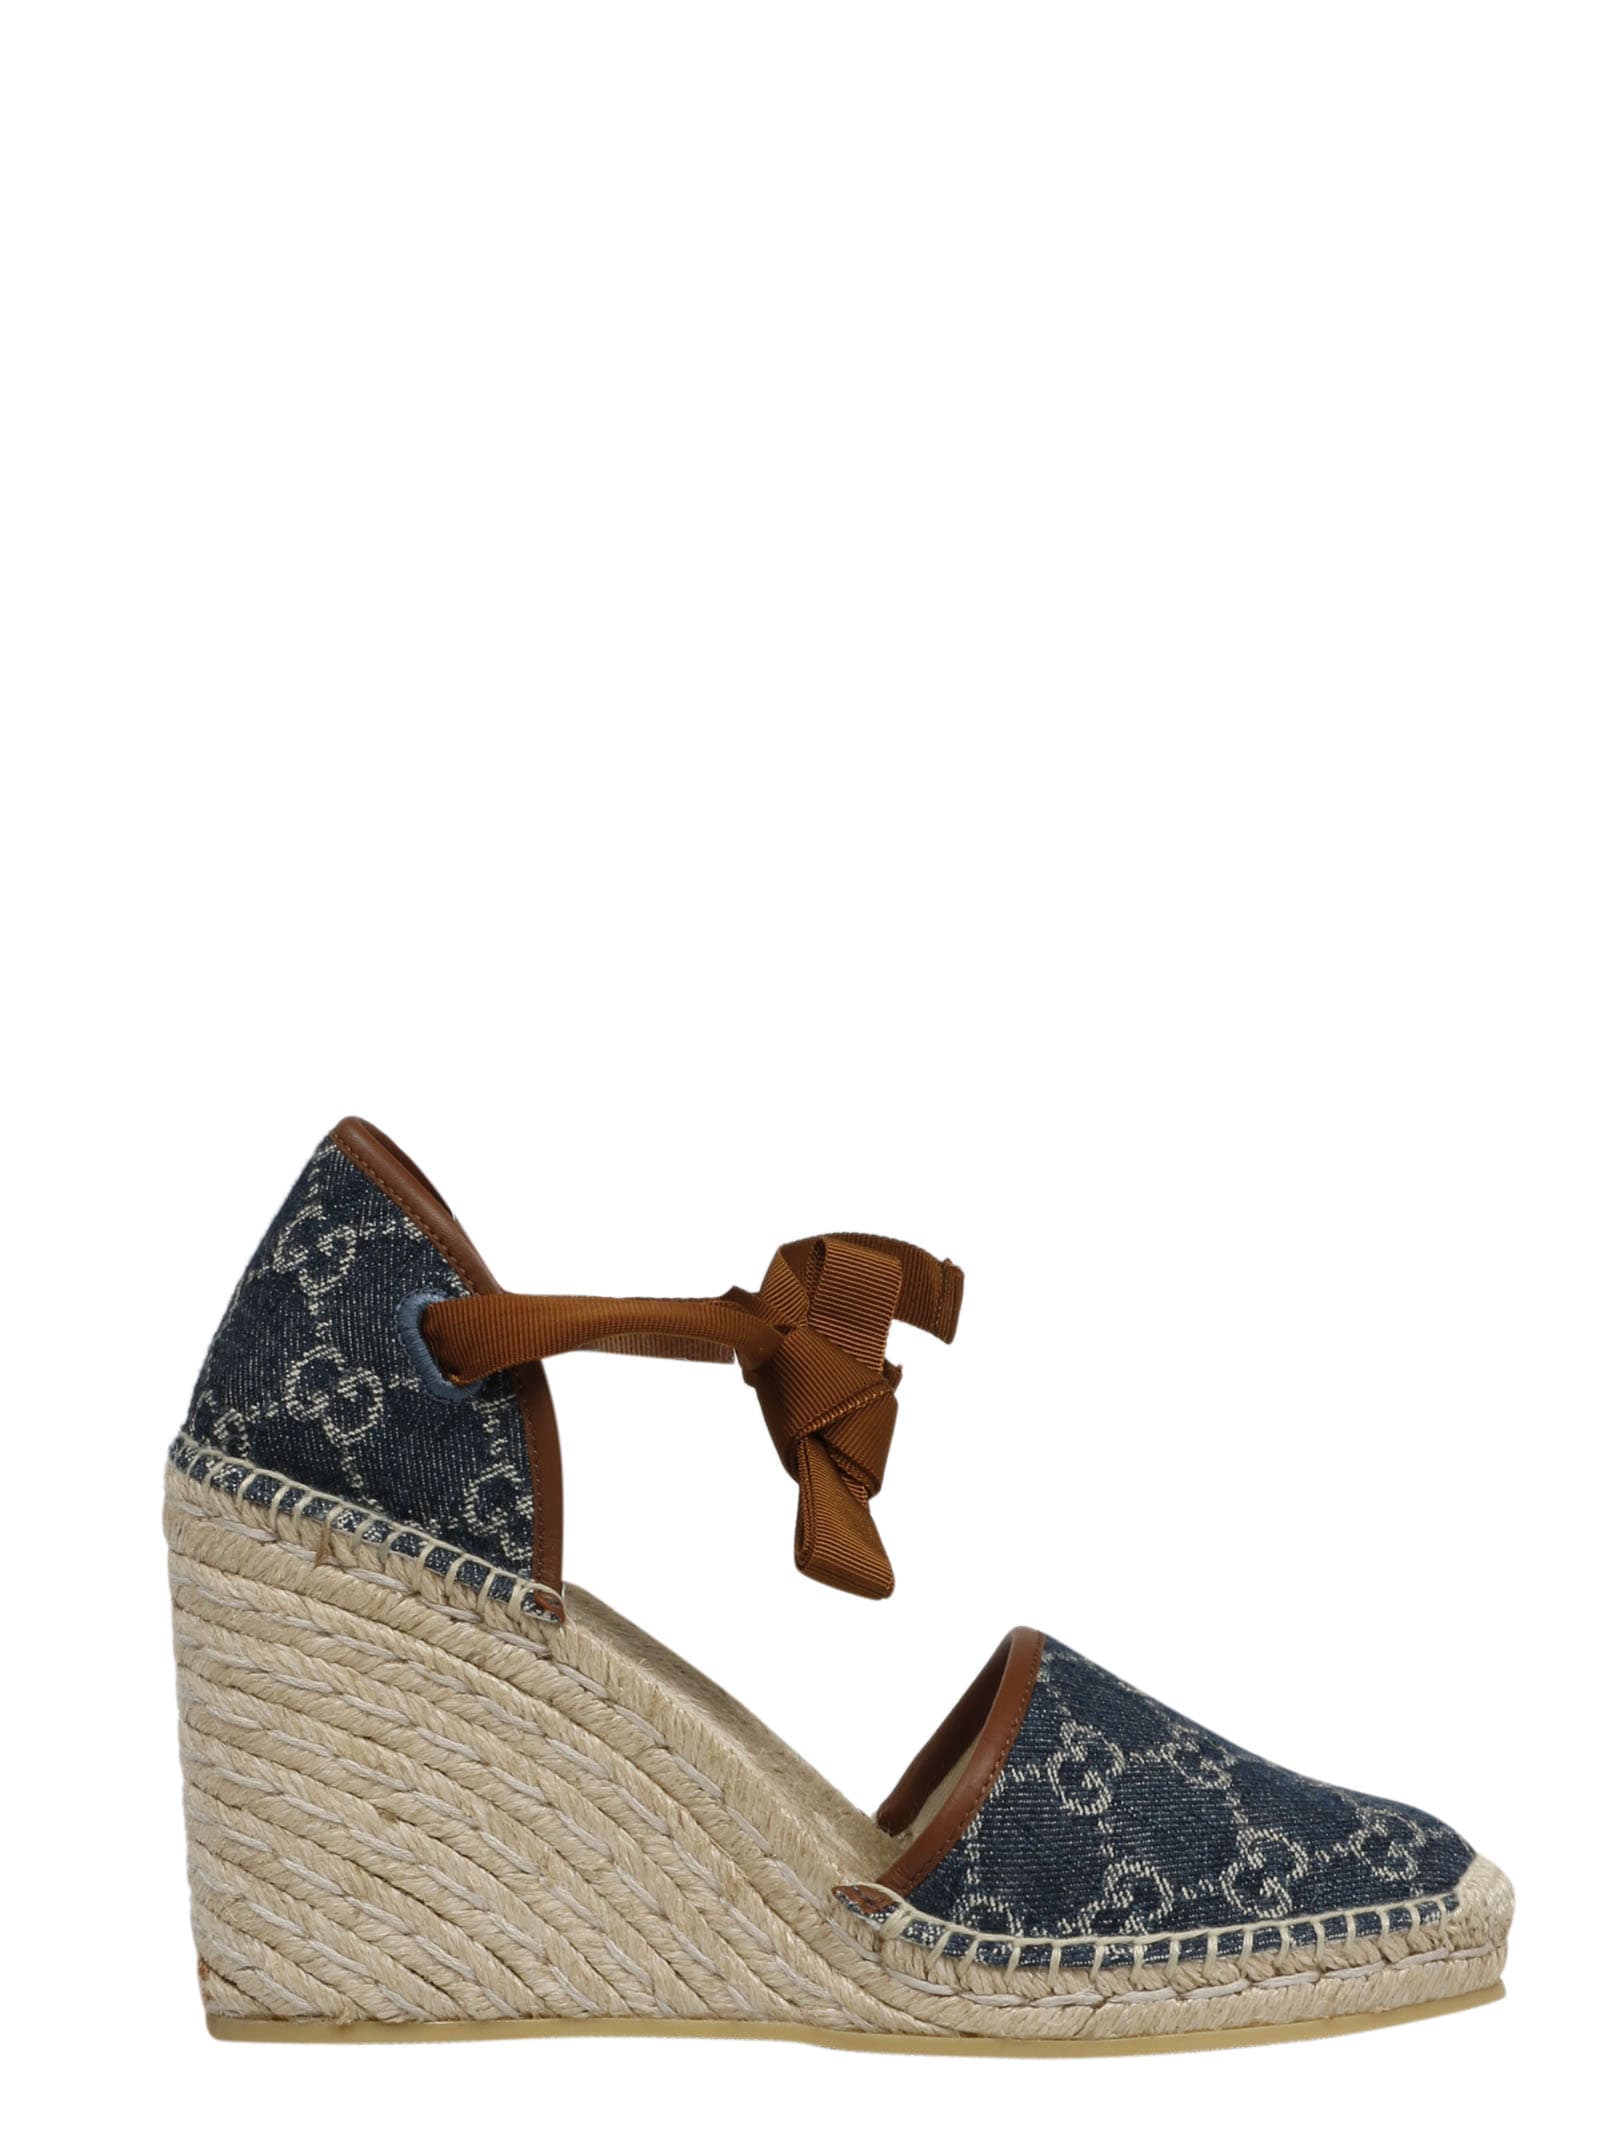 Buy Gucci Gg Denim Wedge Espadrilles online, shop Gucci shoes with free shipping